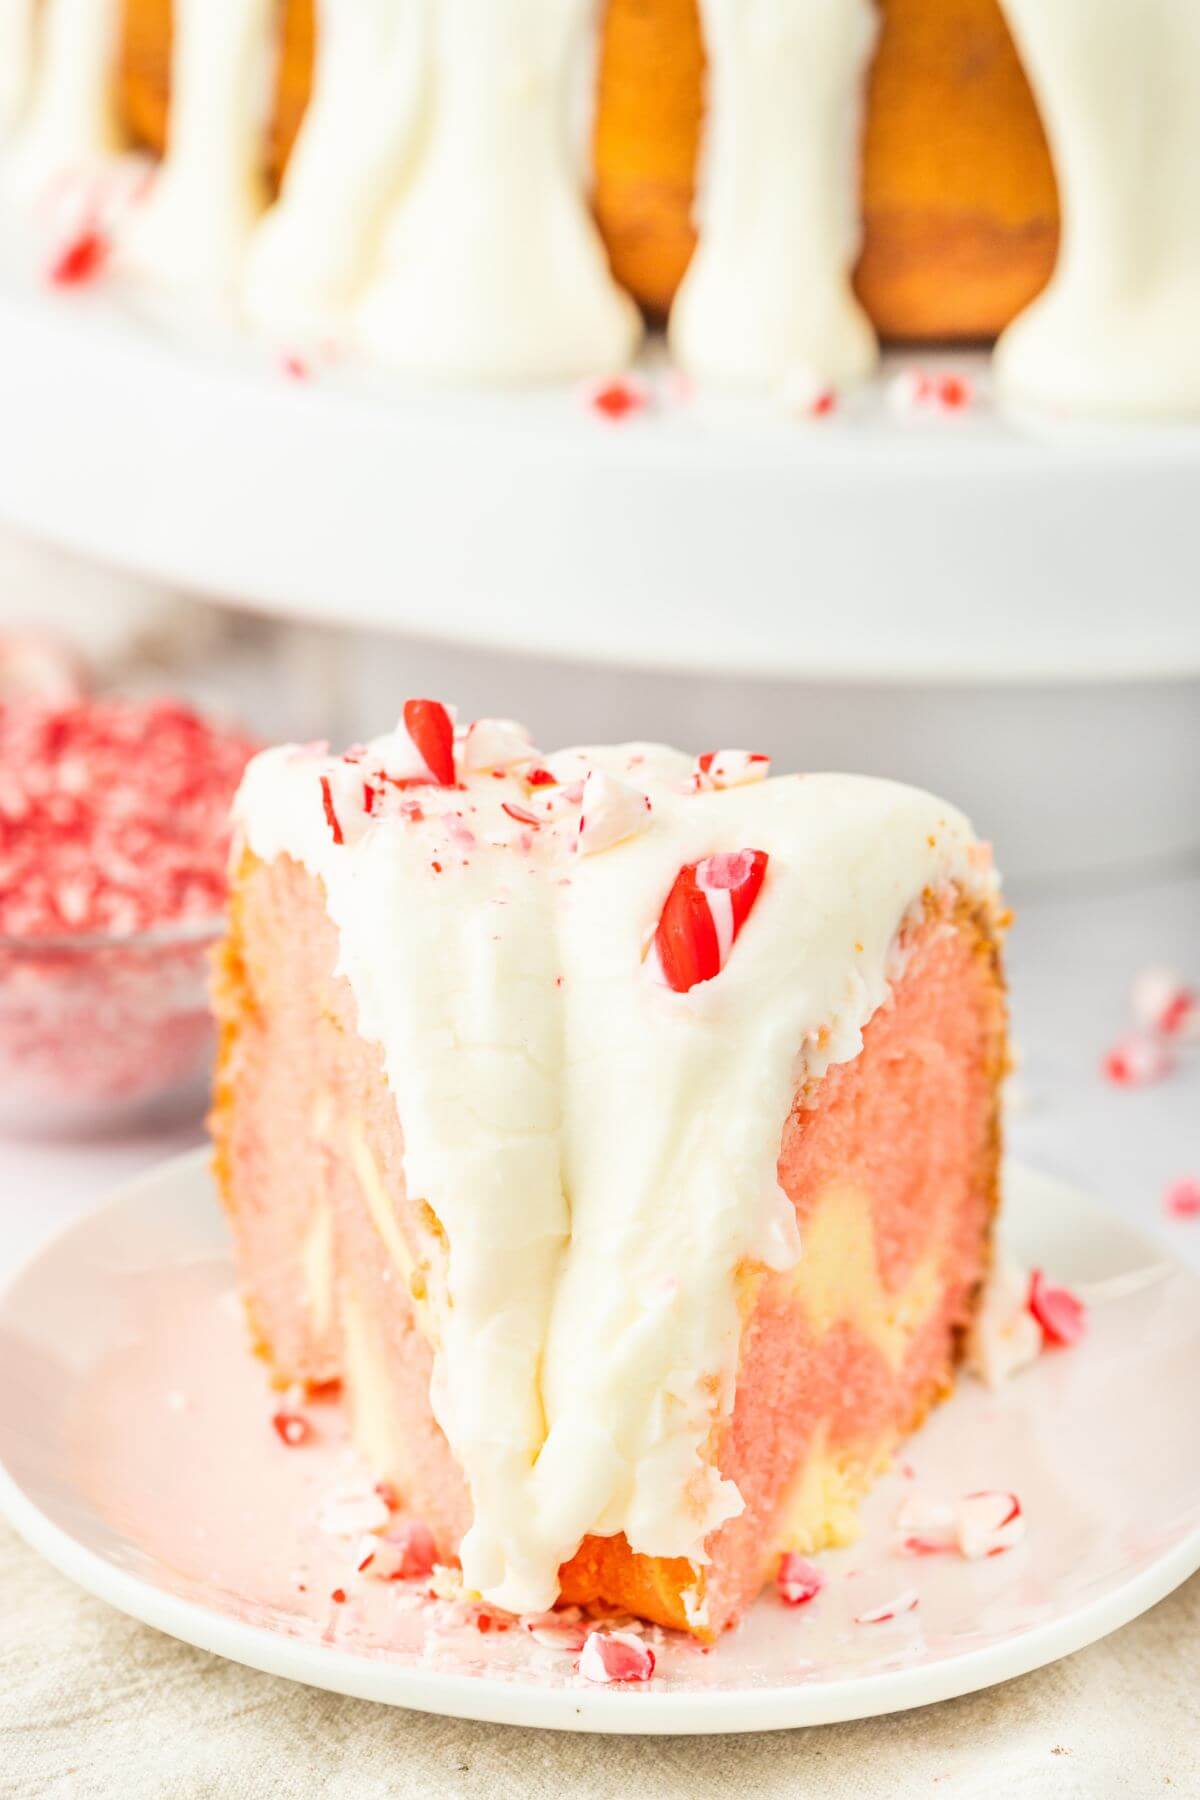 Slice of Christmas Peppermint Bundt Cake served on plate by peppermints.